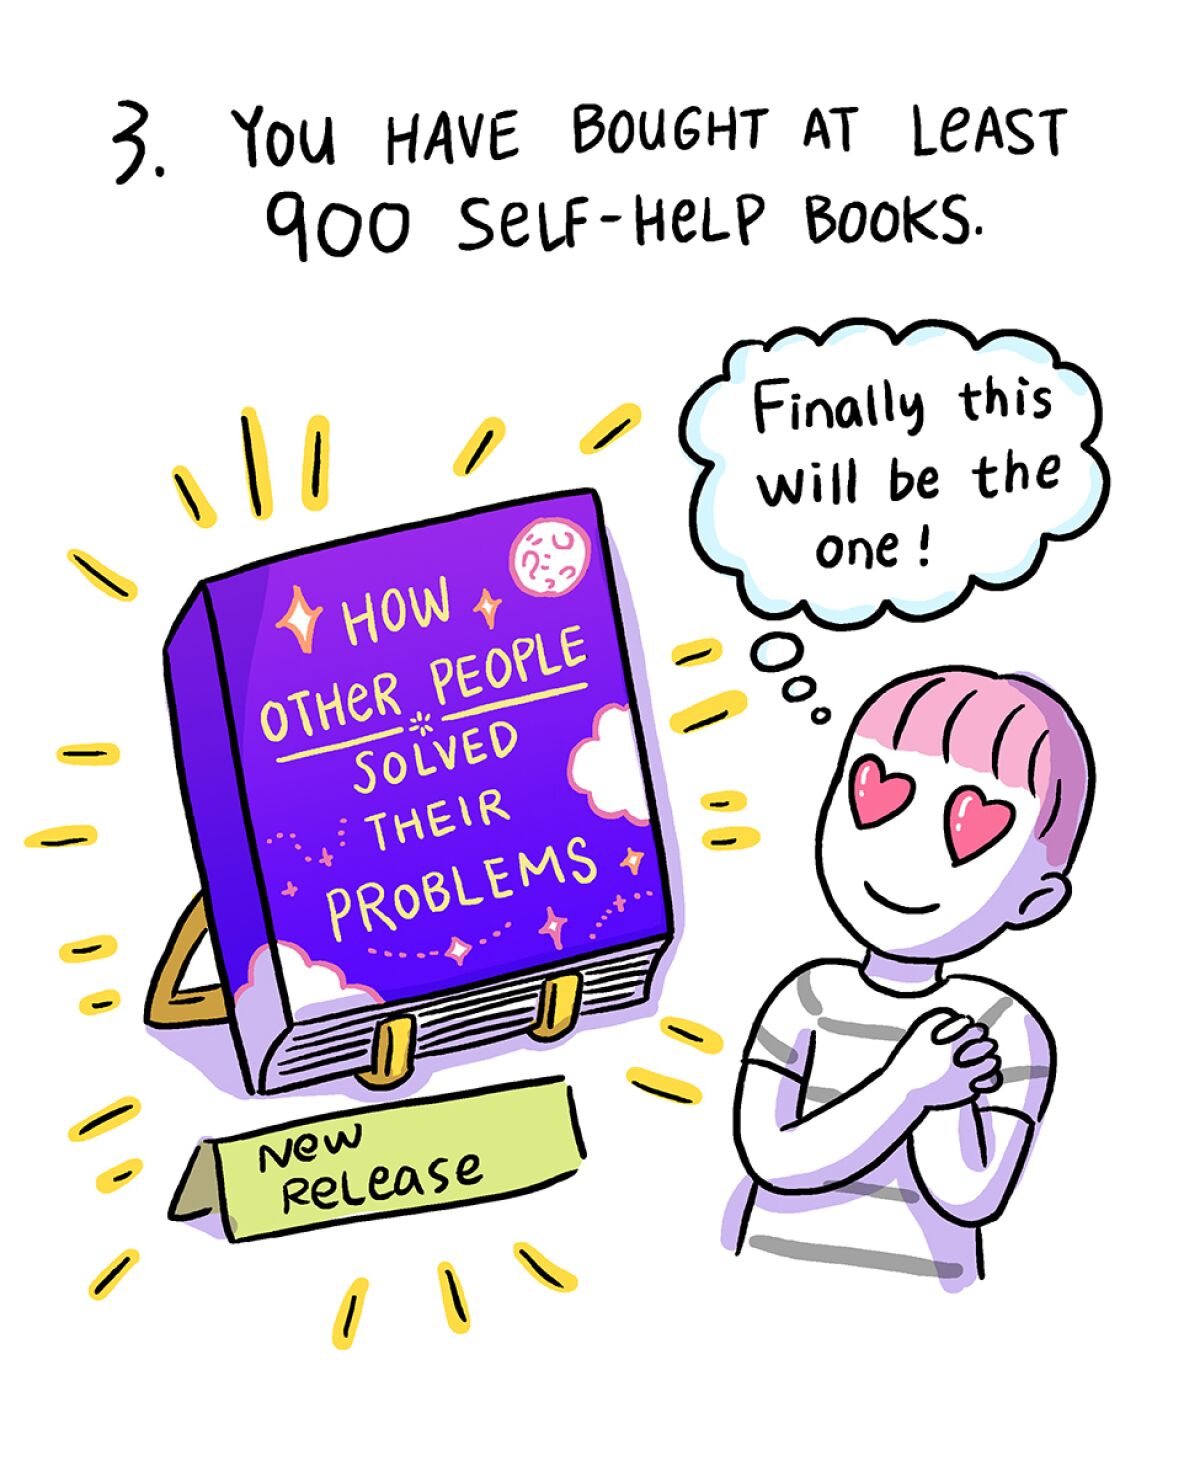 "3. You've bought at least 900 self-help books" text with a drawing of a person with heart eyes looking at a book